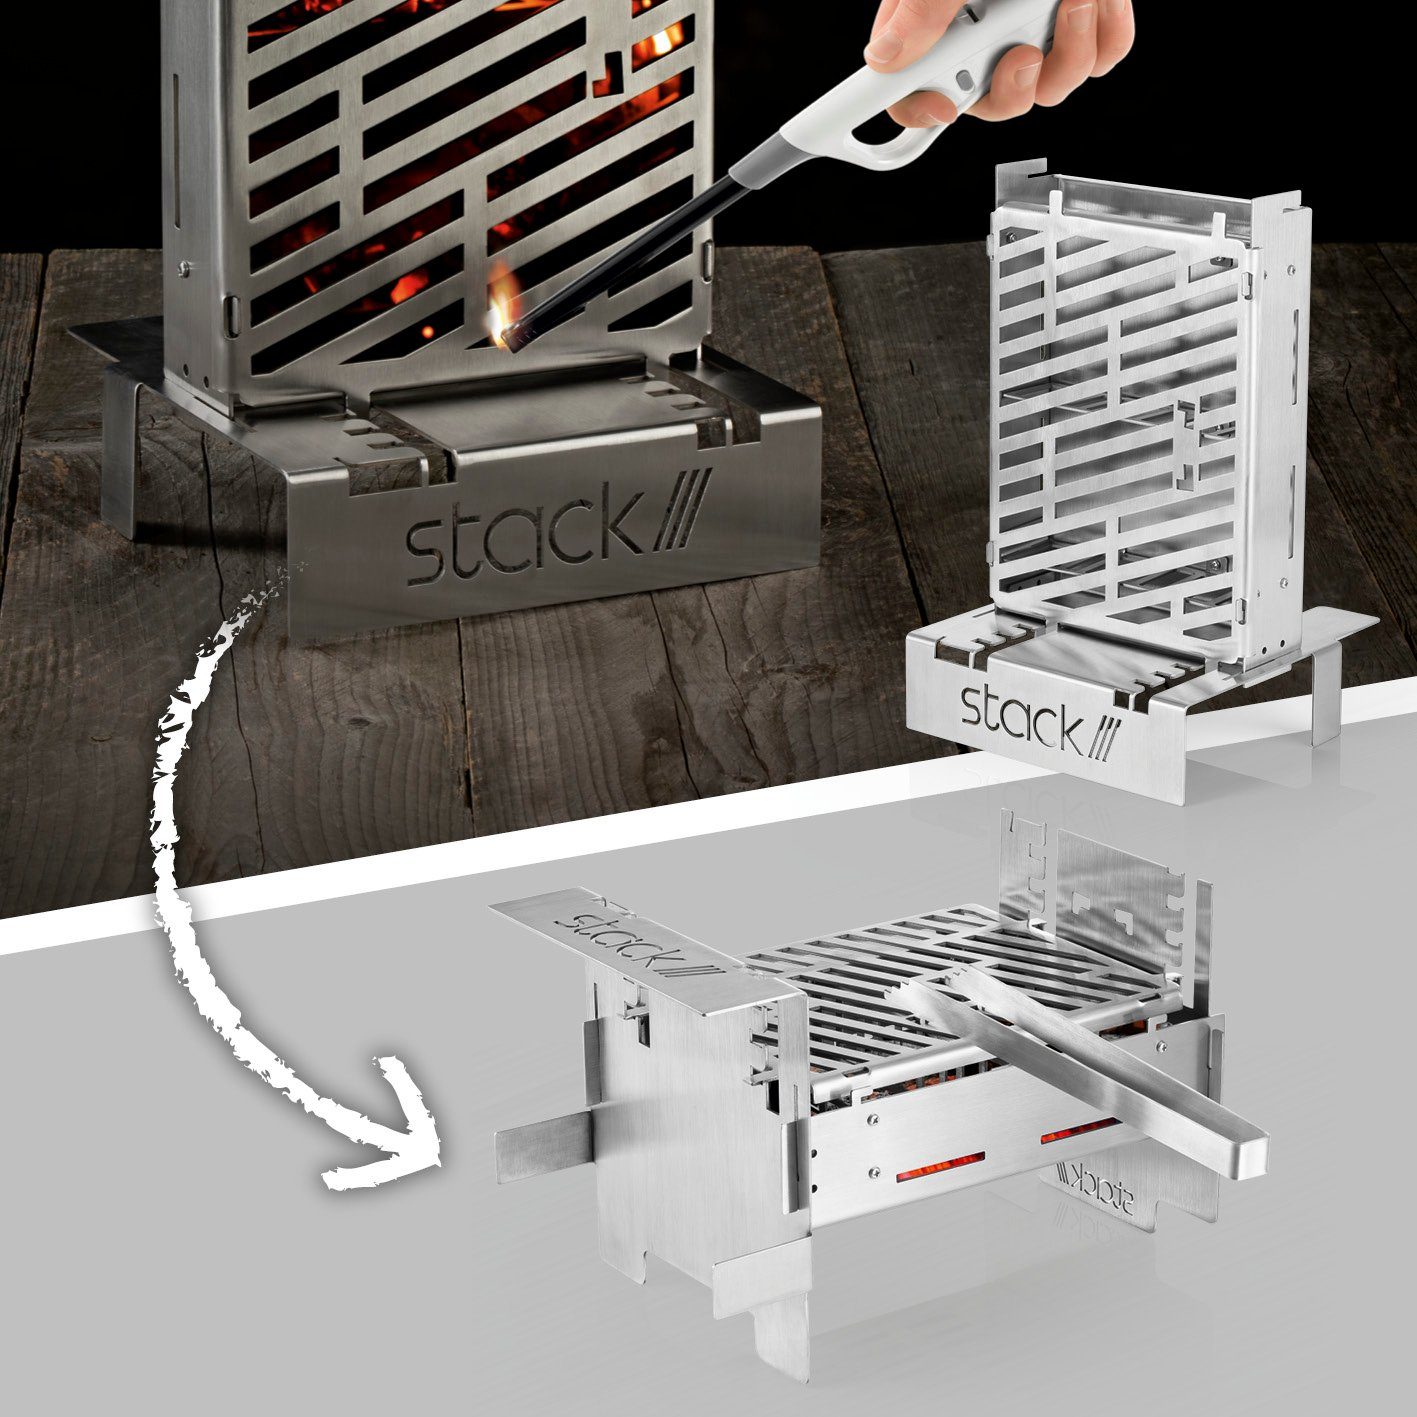 x grill, 1 Grill cm Feuerstelle und stack///grill stack 27 Grillfläche Trangia 21 Stack Holzkohlegrill 2 Feuerkorb n' in